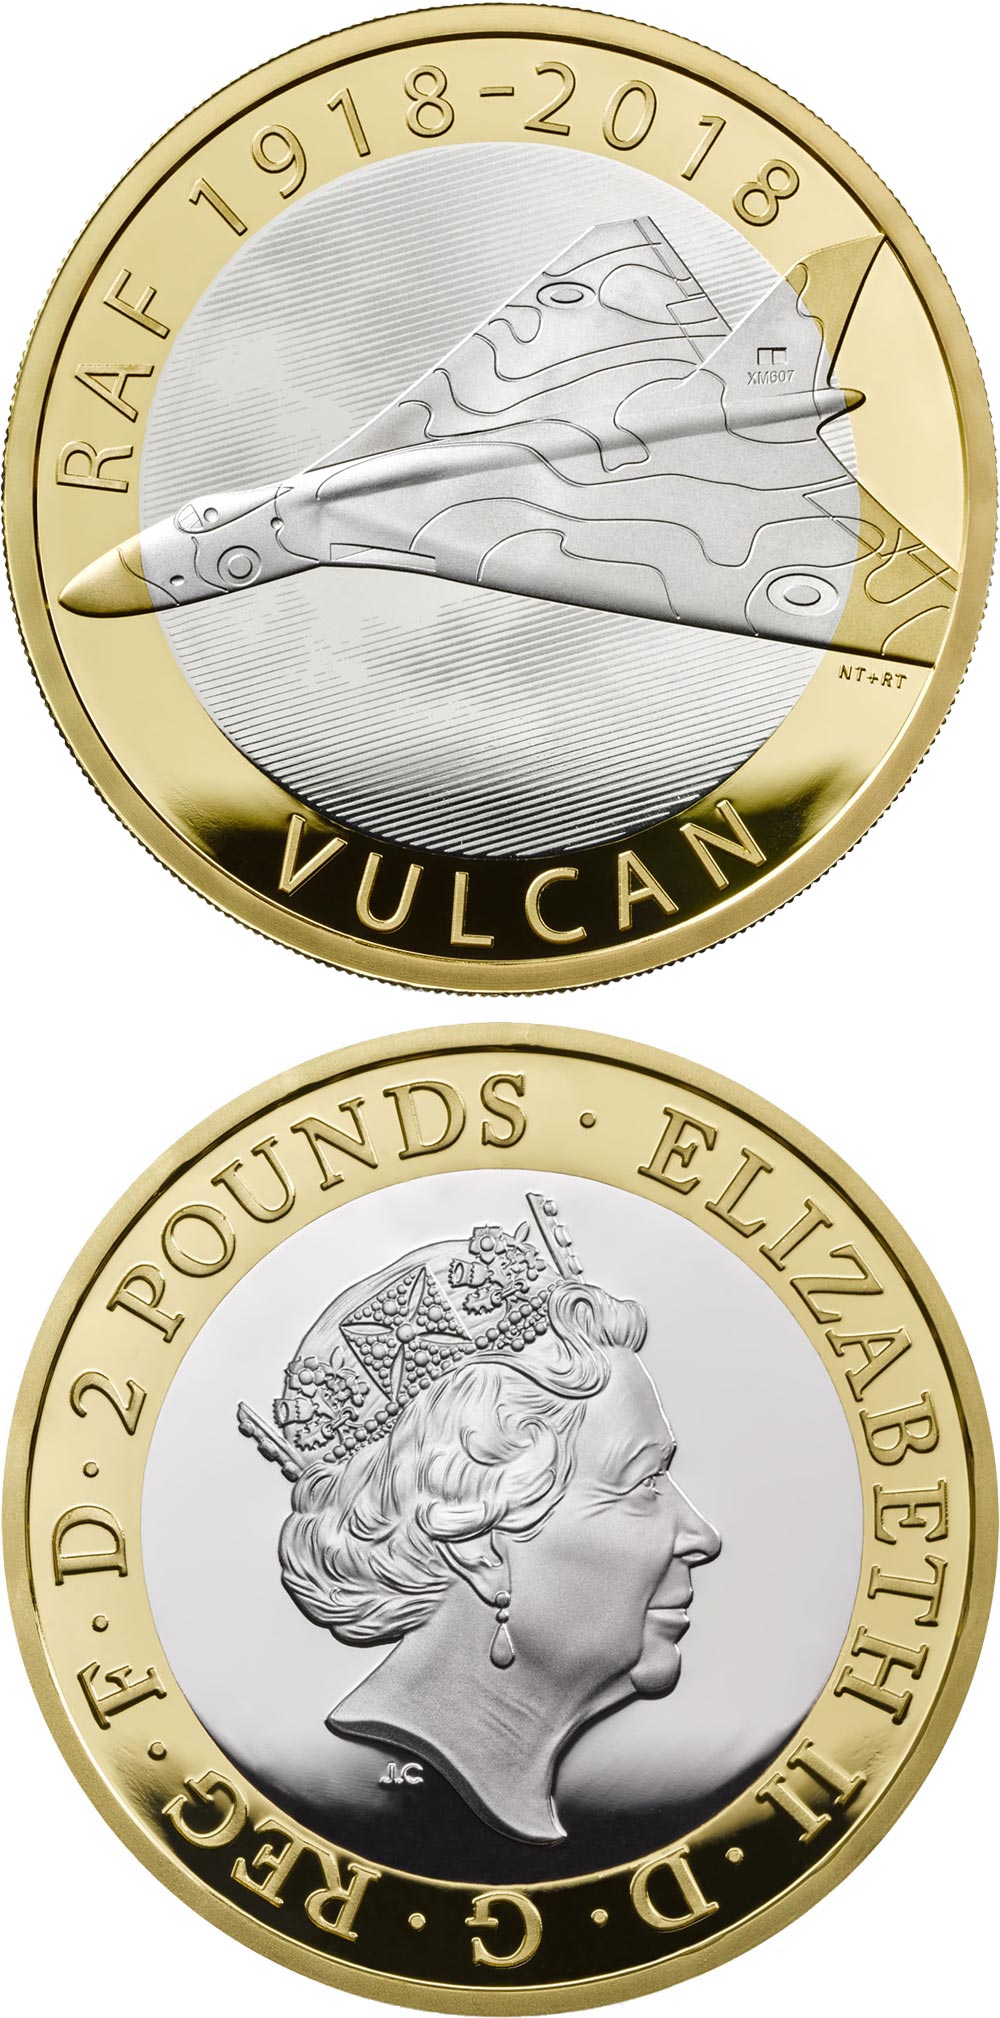 Image of 2 pounds coin - RAF Centenary Vulcan | United Kingdom 2018.  The Bimetal: CuNi, nordic gold coin is of Proof, BU quality.